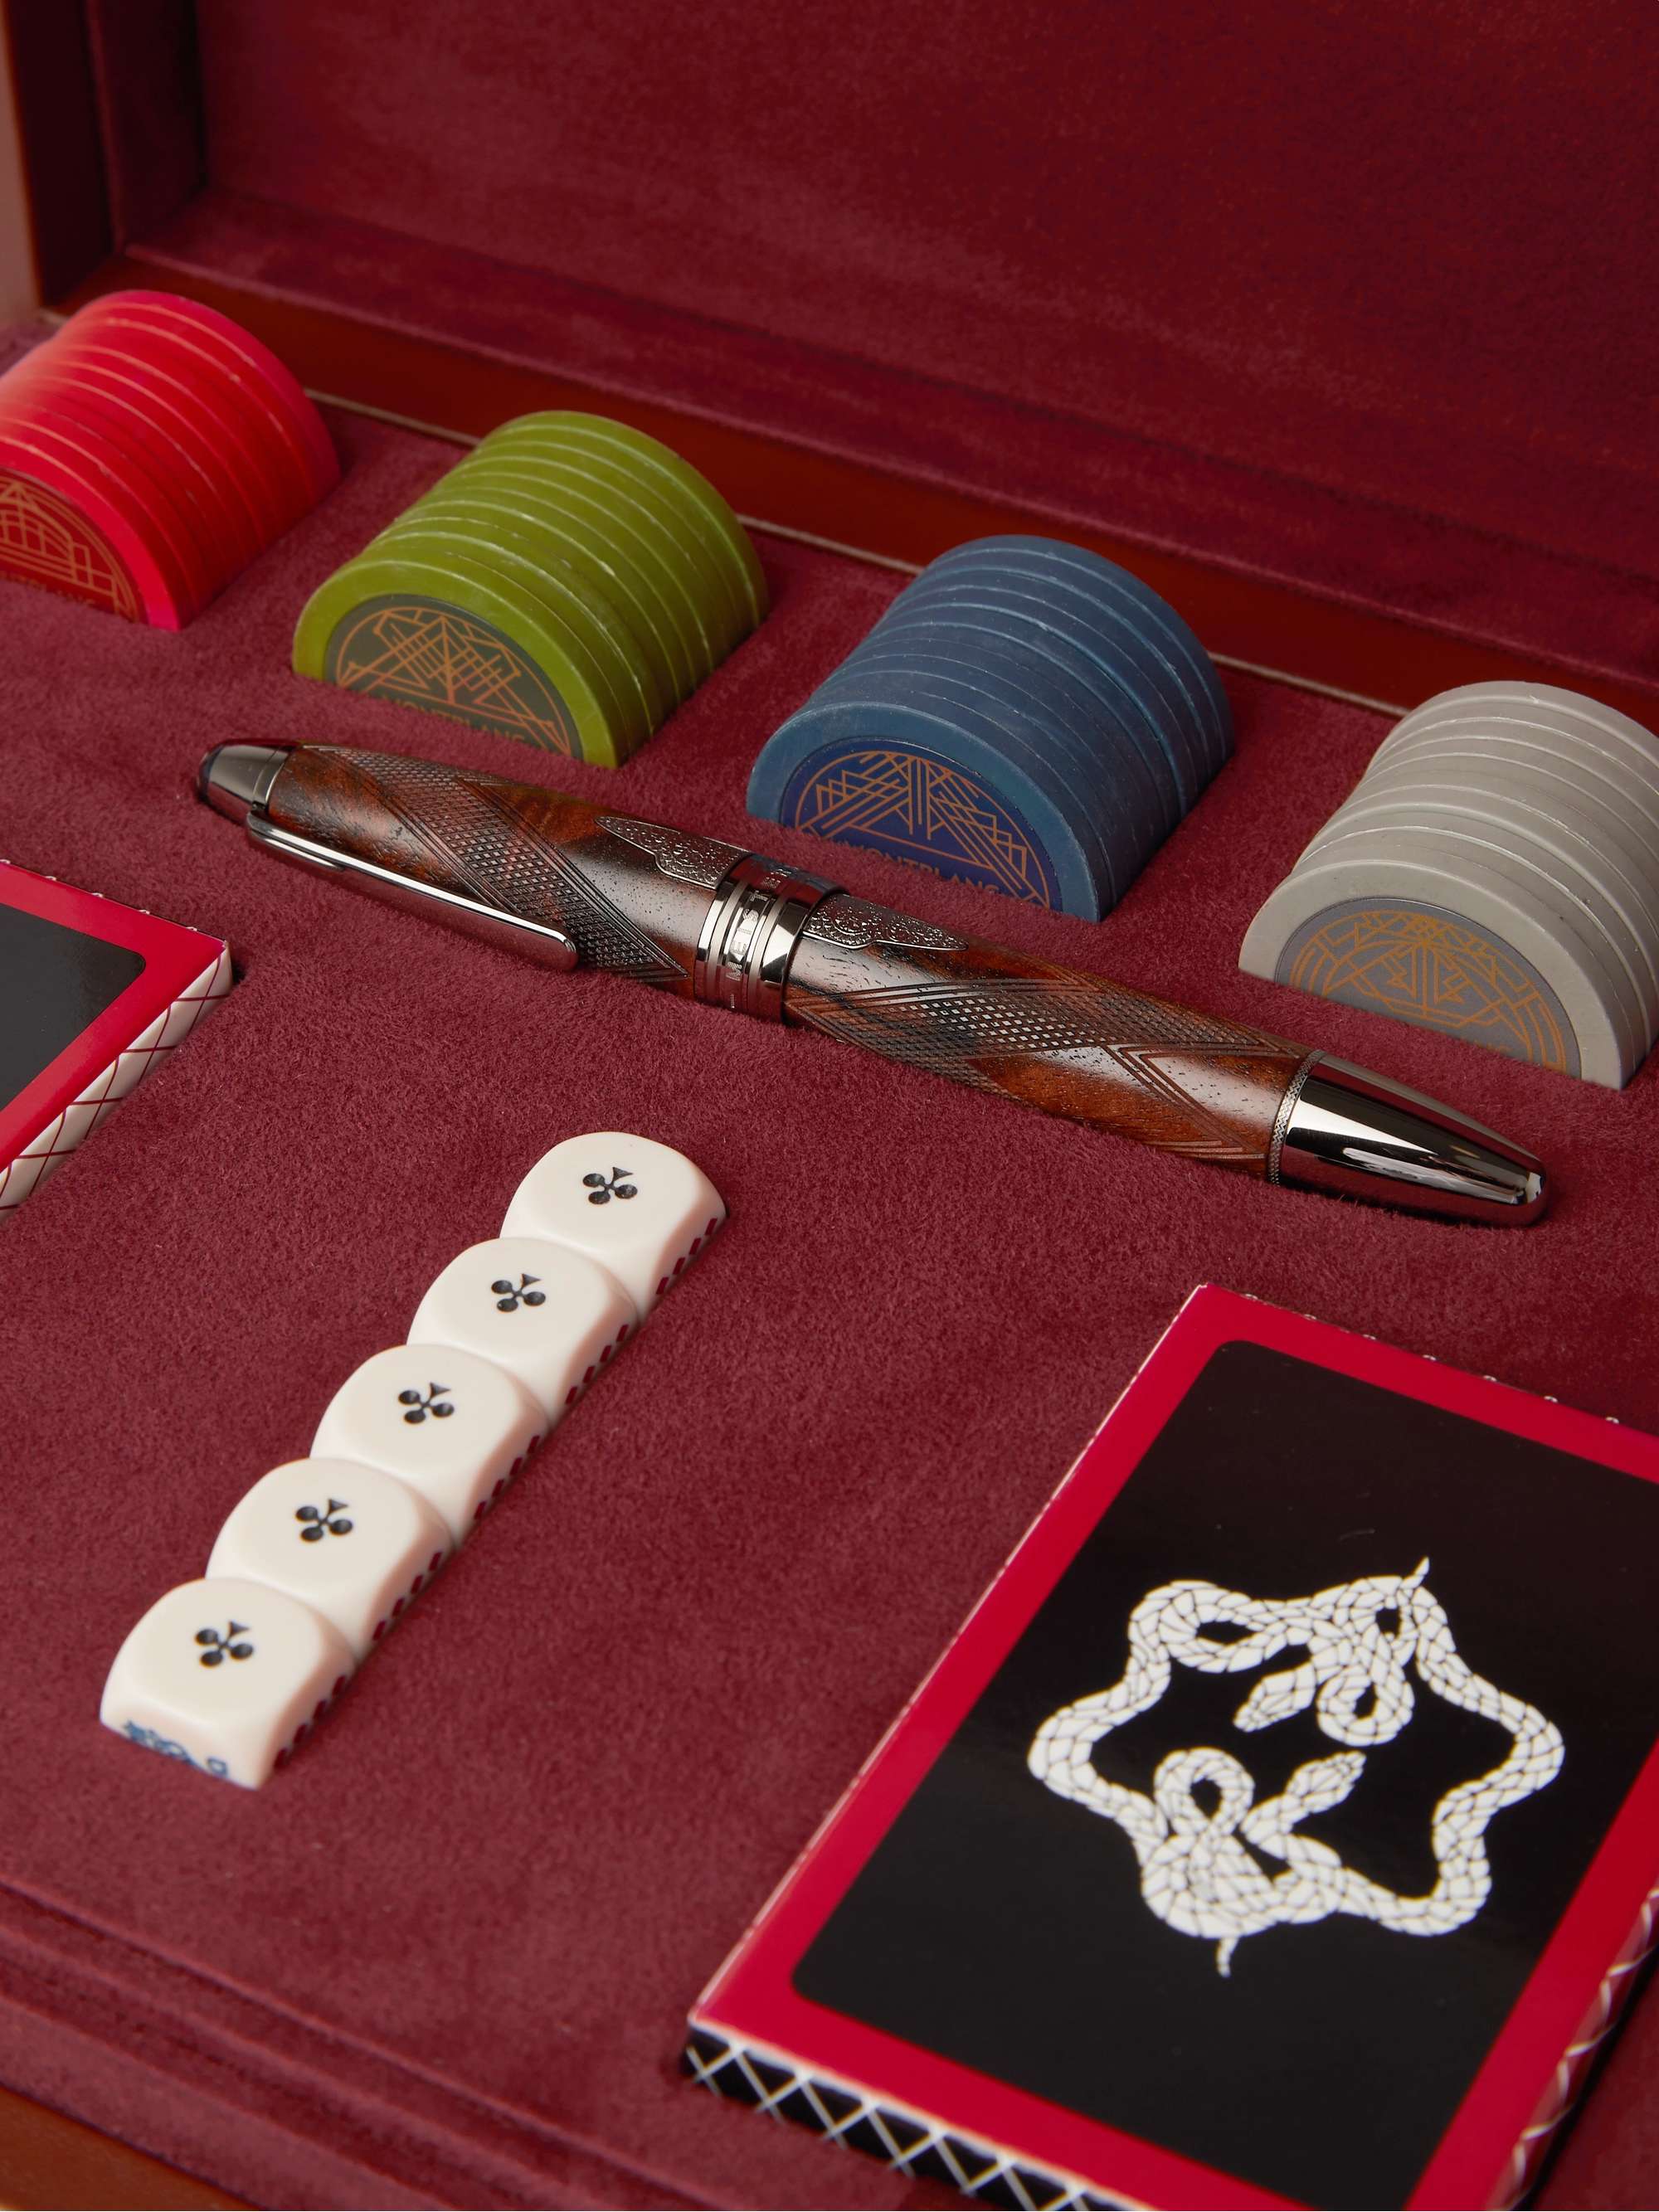 MONTBLANC + Purdey The Art of Gifting Poker Set